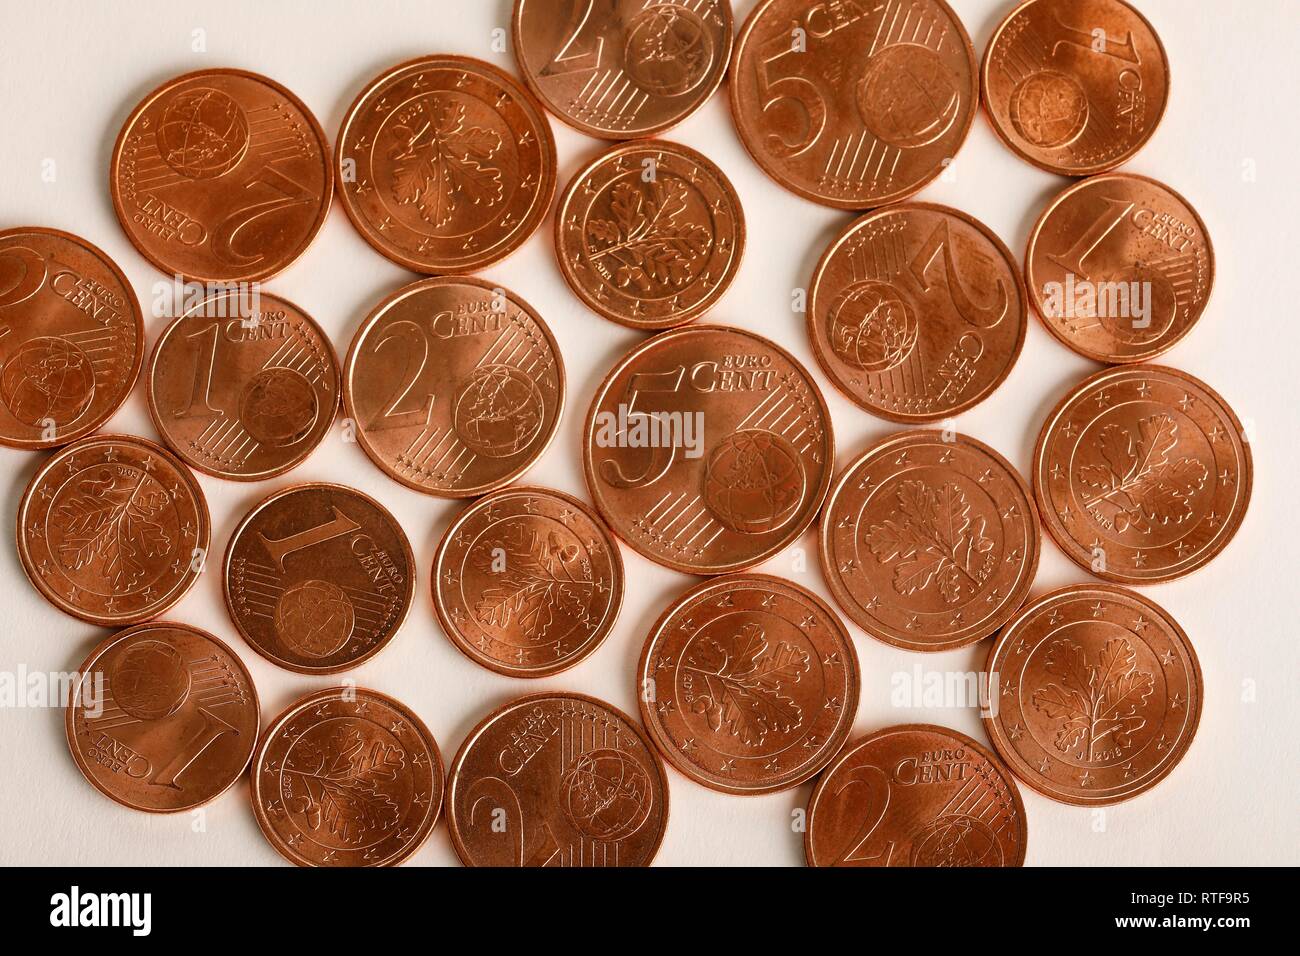 Euro-Cent coins, 1-Cent, 2-Cent and 5-Cent coins, Germany Stock Photo